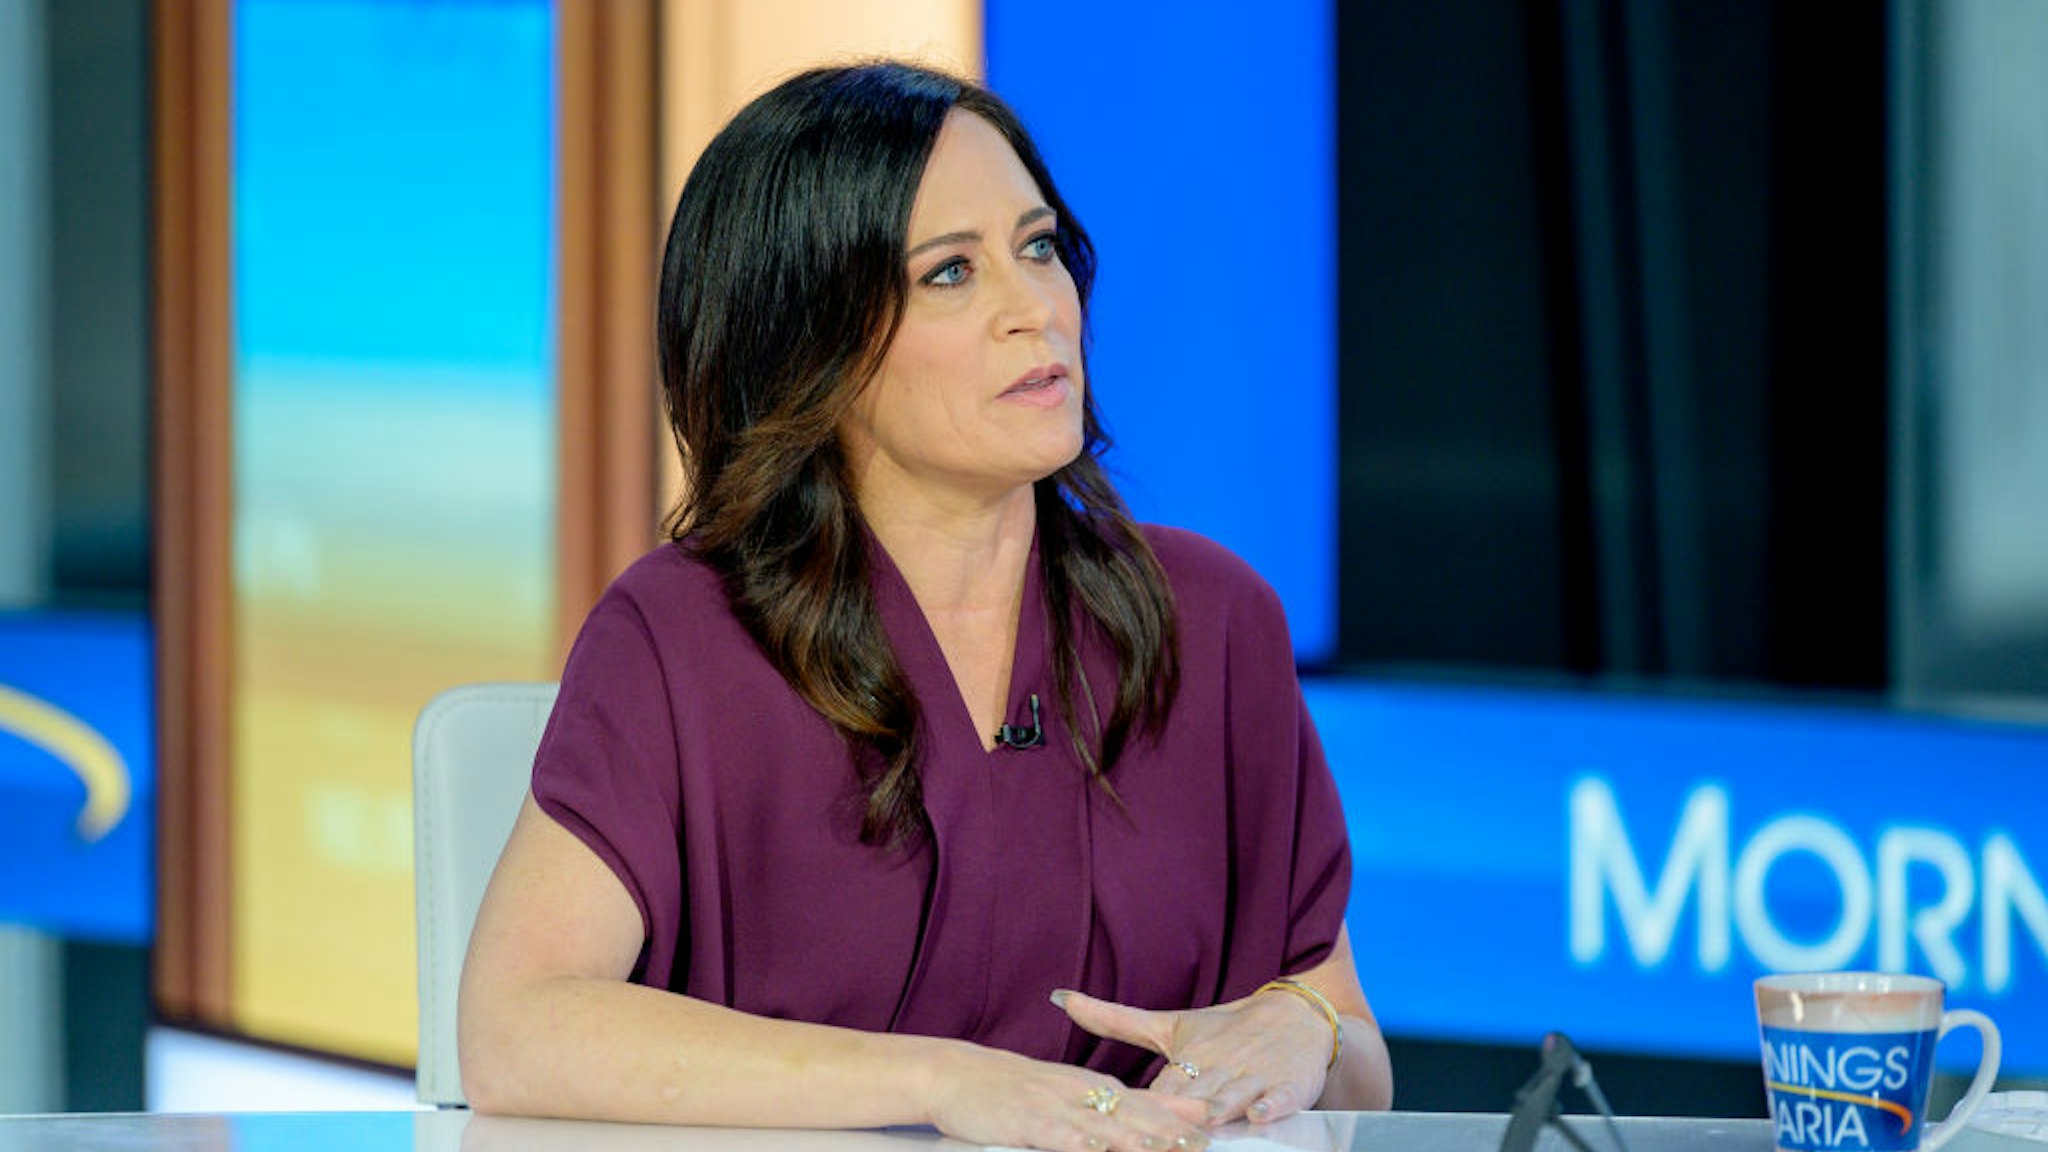 NEW YORK, NEW YORK - SEPTEMBER 23: White House Press Secretary Stephanie Grisham visits "Mornings With Maria" with Anchor Maria Bartiromo at Fox Business Network Studios on September 23, 2019 in New York City.